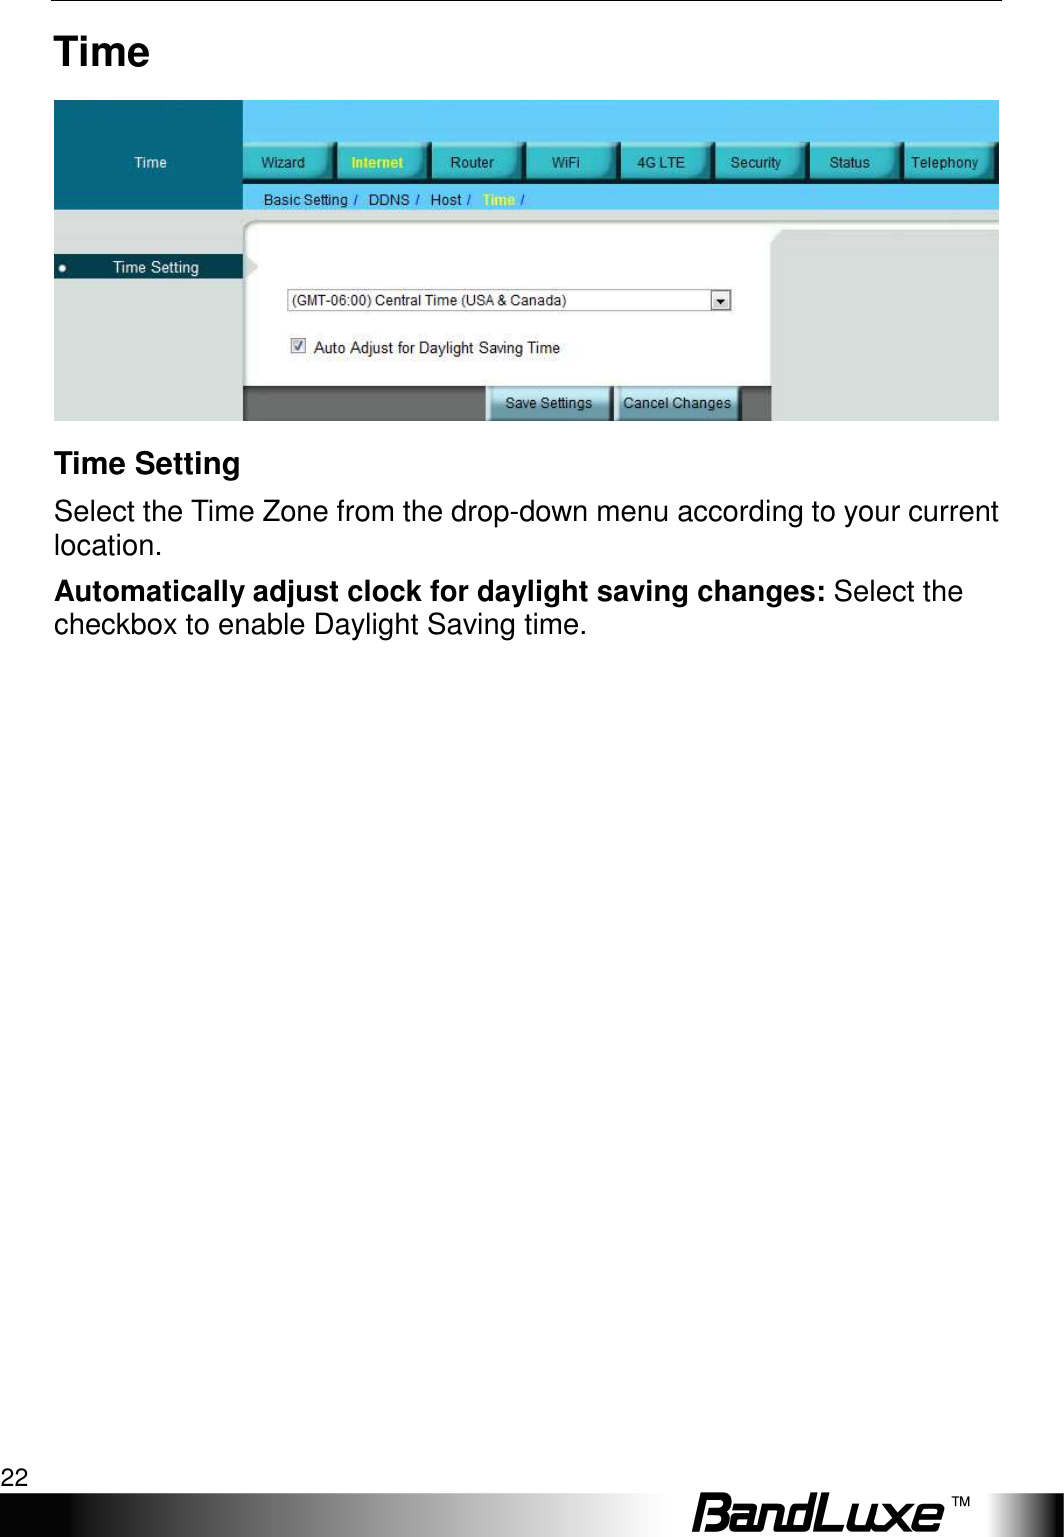 Internet Setup 22  Time  Time Setting Select the Time Zone from the drop-down menu according to your current location.   Automatically adjust clock for daylight saving changes: Select the checkbox to enable Daylight Saving time. 